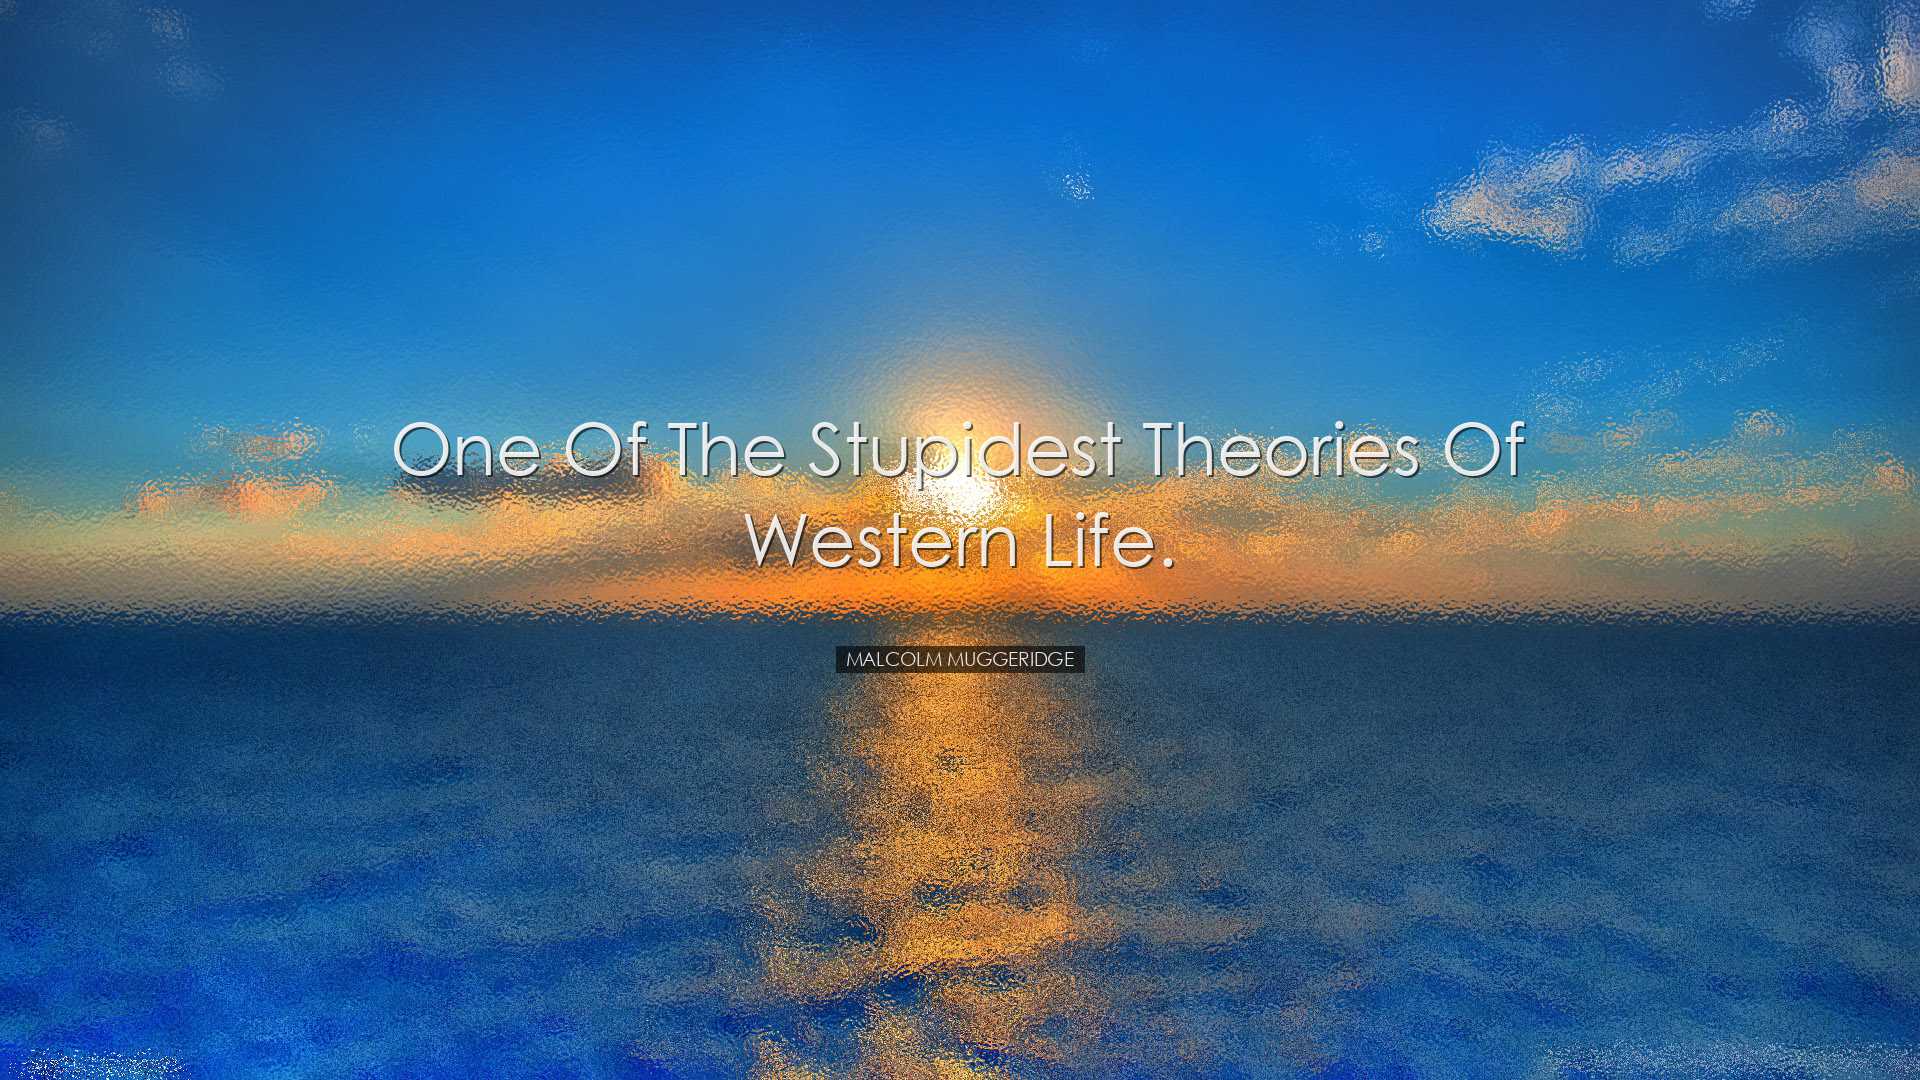 One of the stupidest theories of Western life. - Malcolm Muggeridg